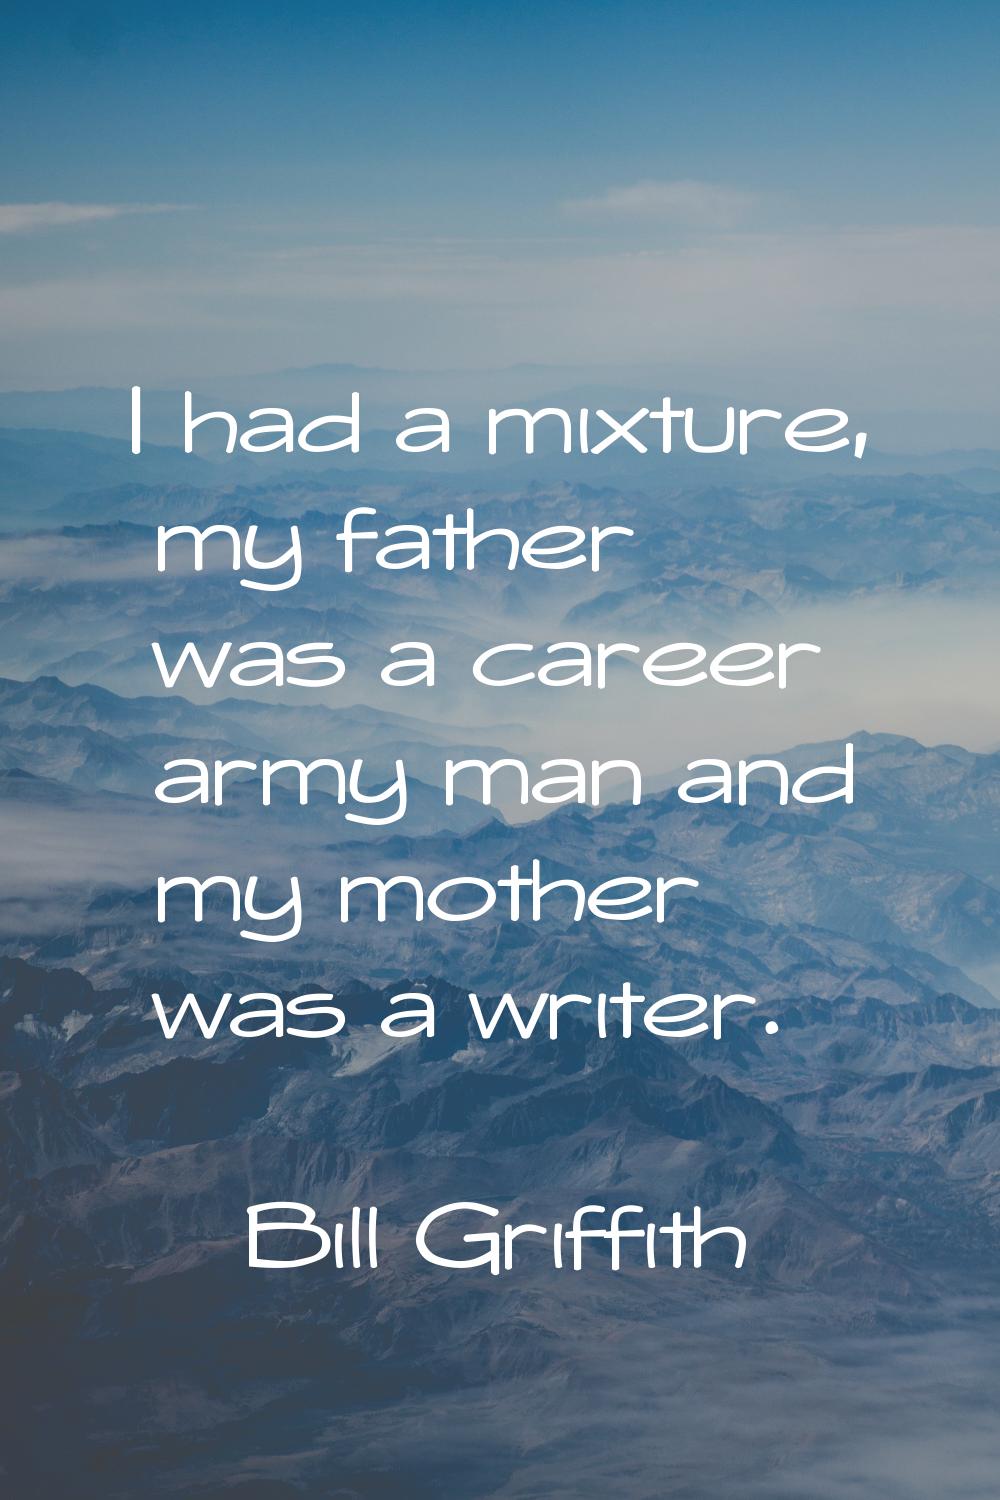 I had a mixture, my father was a career army man and my mother was a writer.